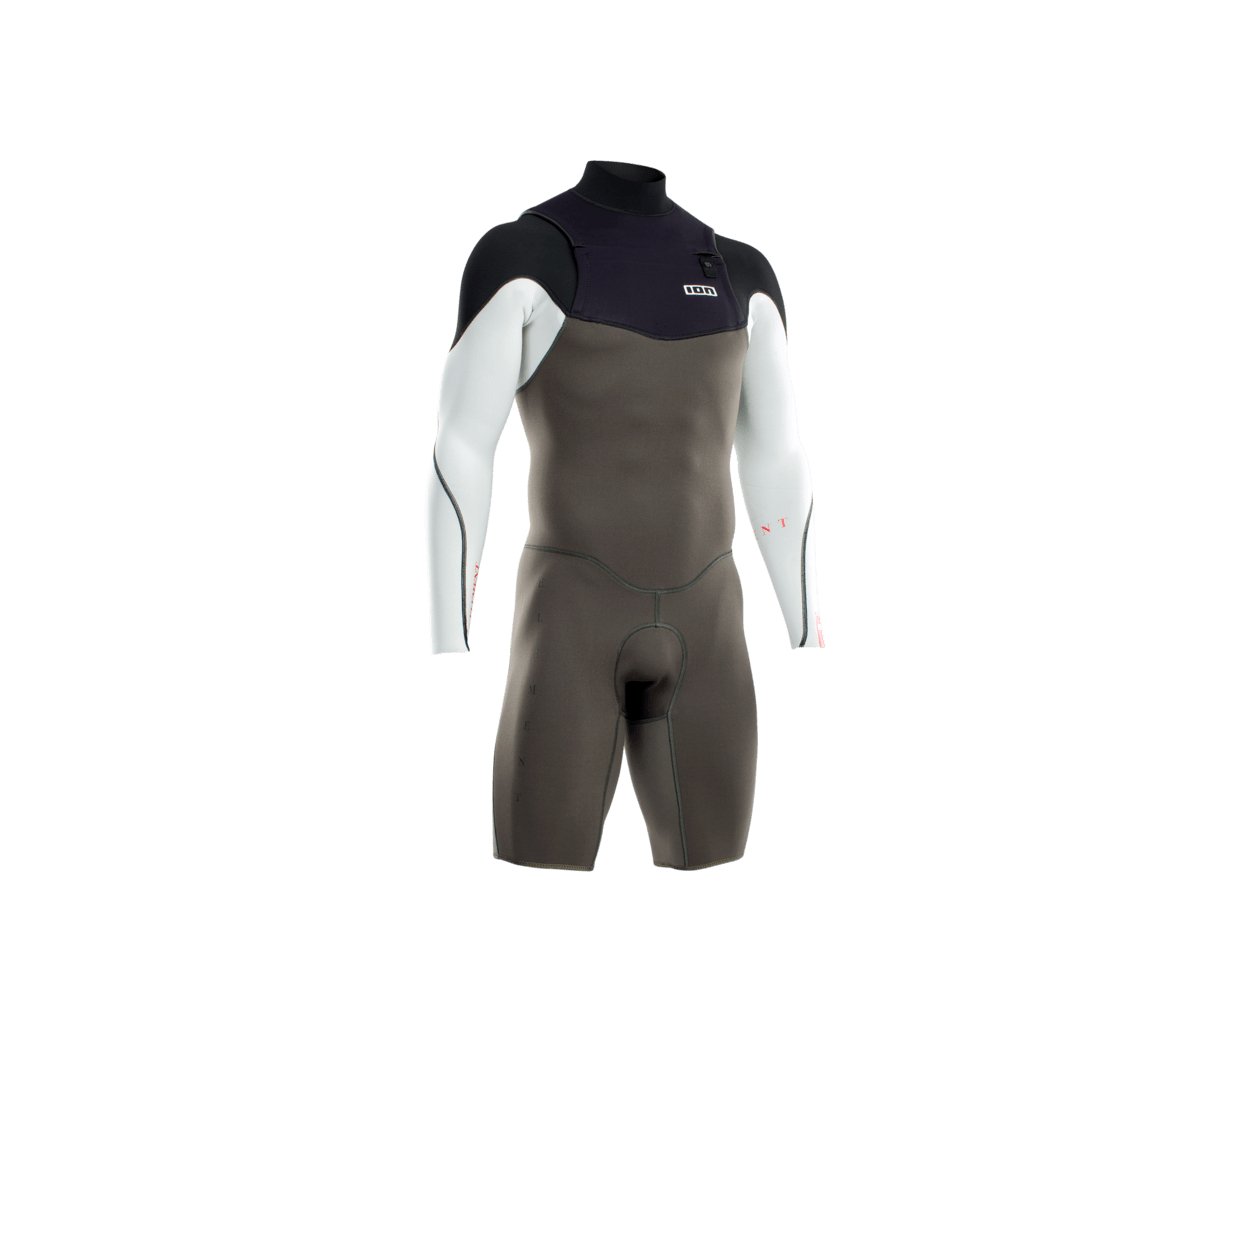 ION Men Wetsuit Element 2/2 Shorty Longsleeve Front Zip 2022 - Worthing Watersports - 9008415951031 - Wetsuits - ION Water